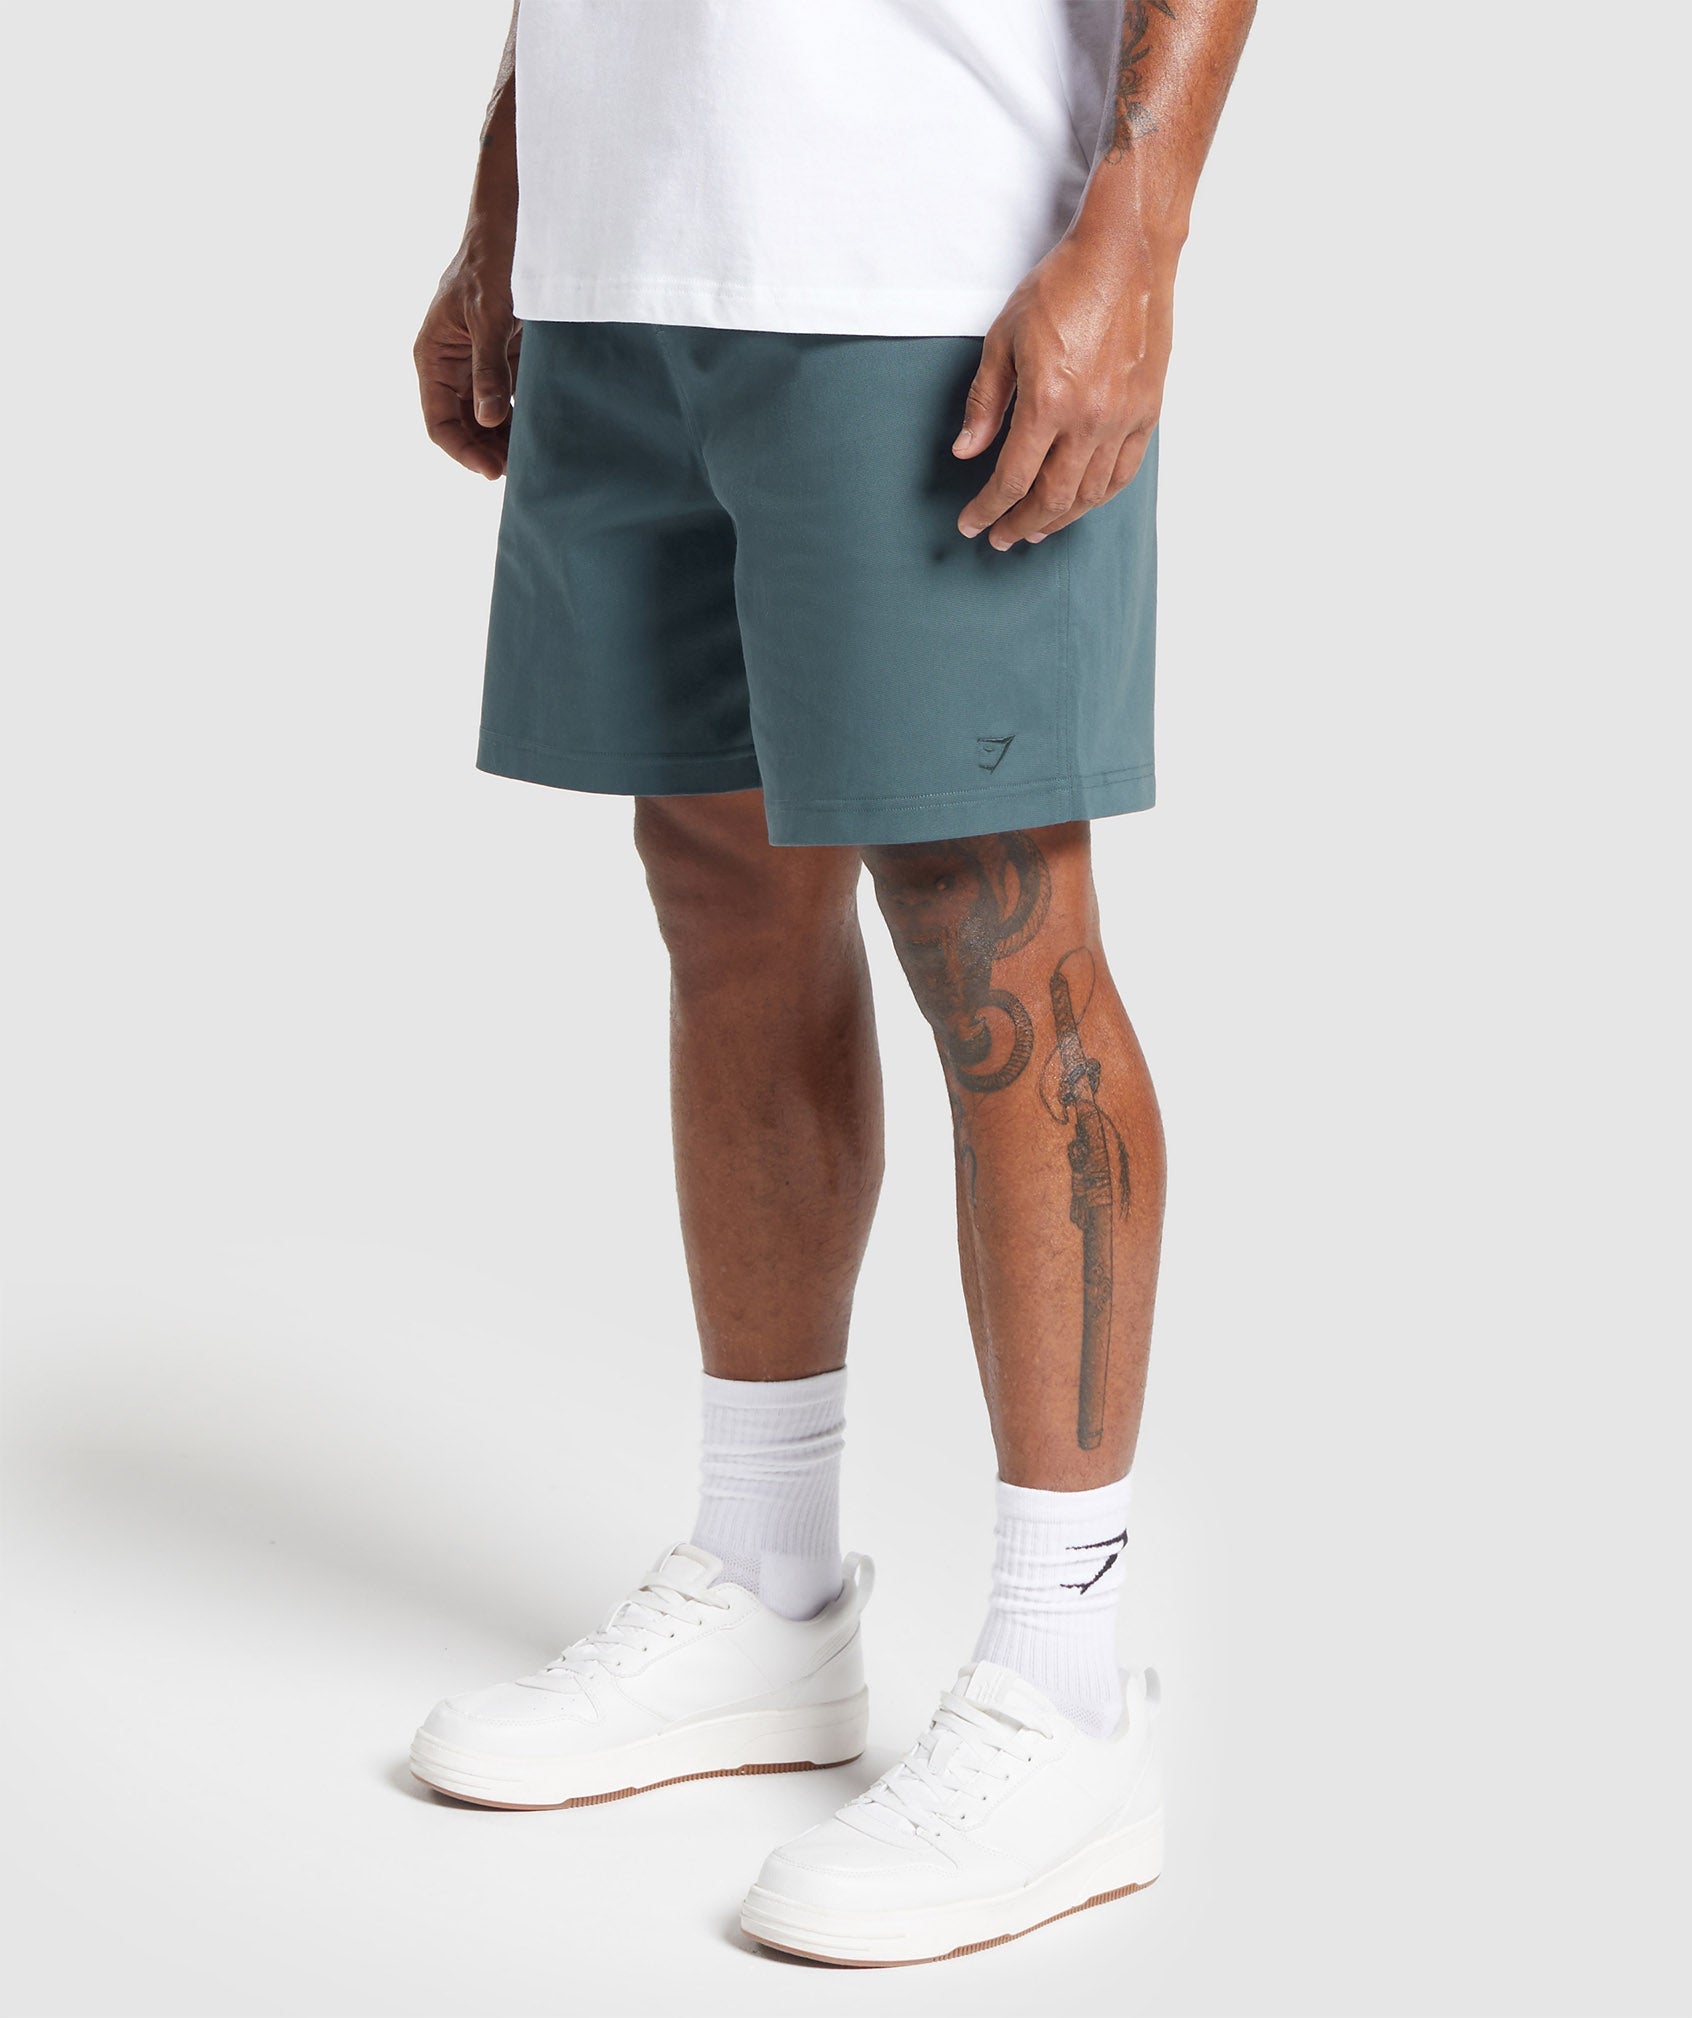 Rest Day Woven Shorts in Smokey Teal - view 3